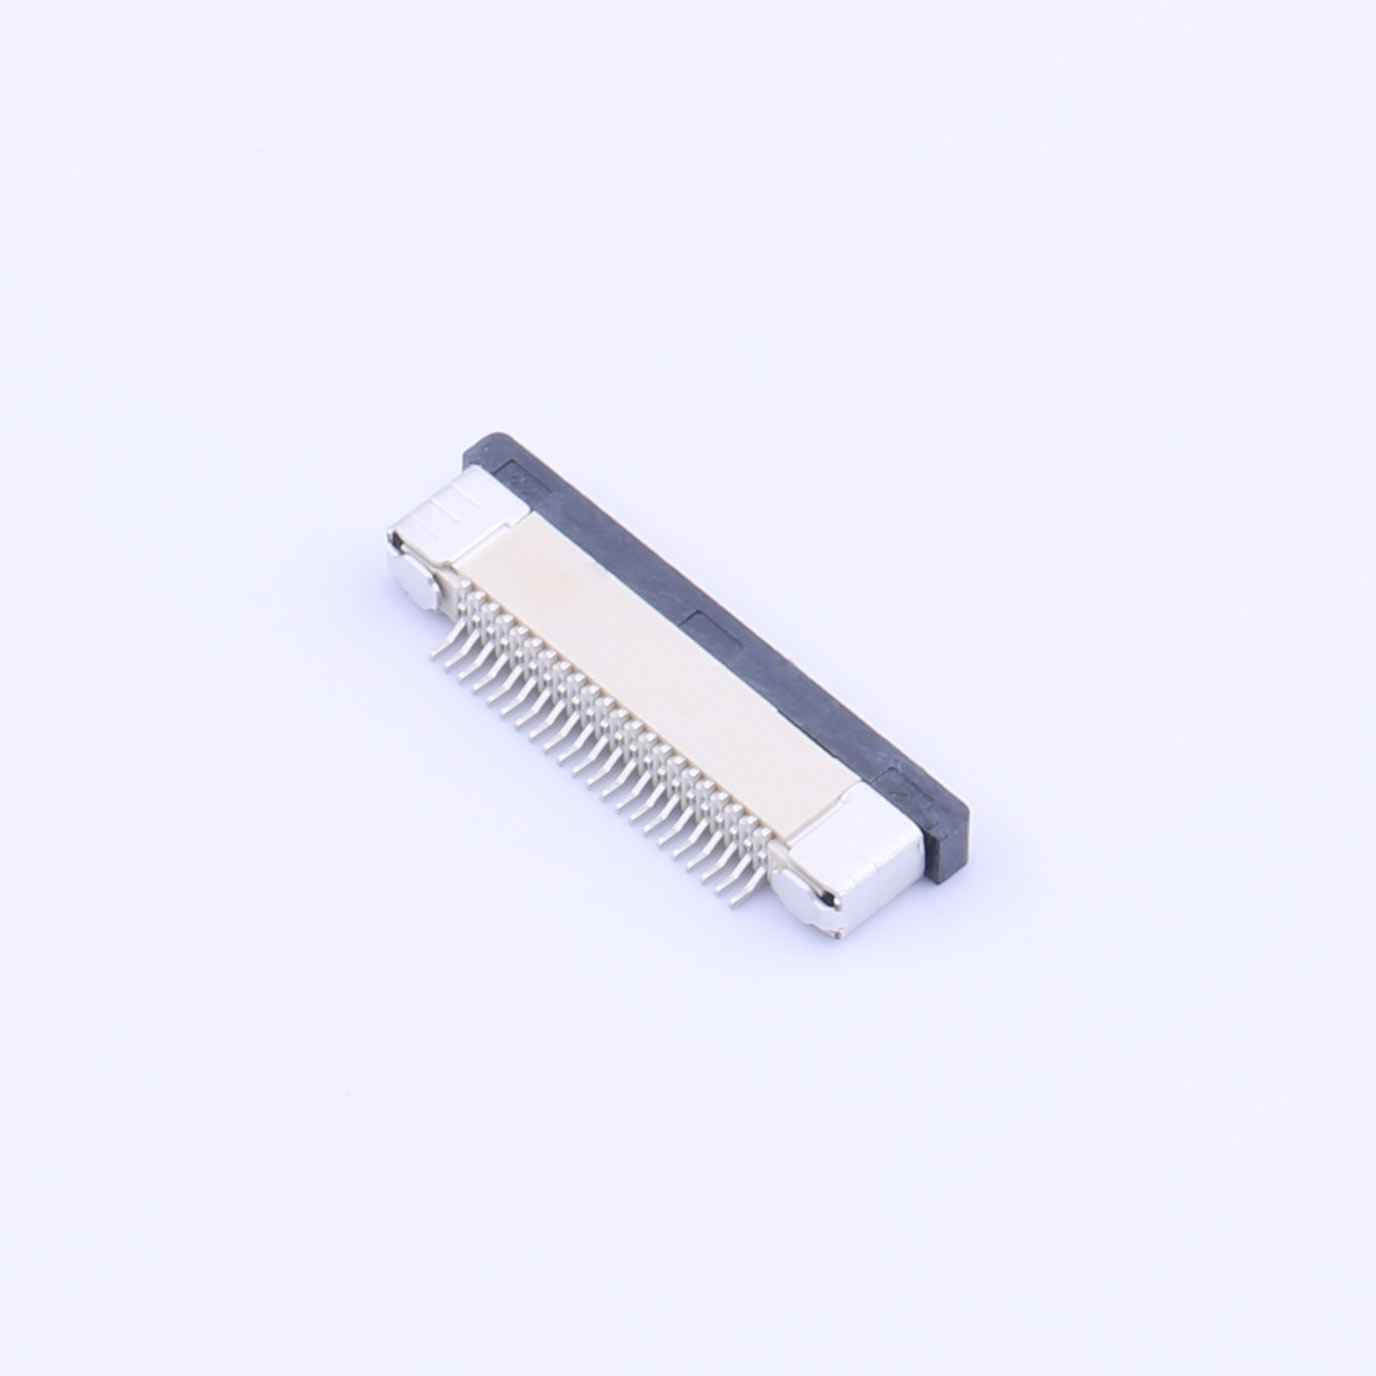 Kinghelm 0.5mm Pitch FPC FFC Connector 22P Height 2mm - KH-CL0.5-H2.0-22PIN